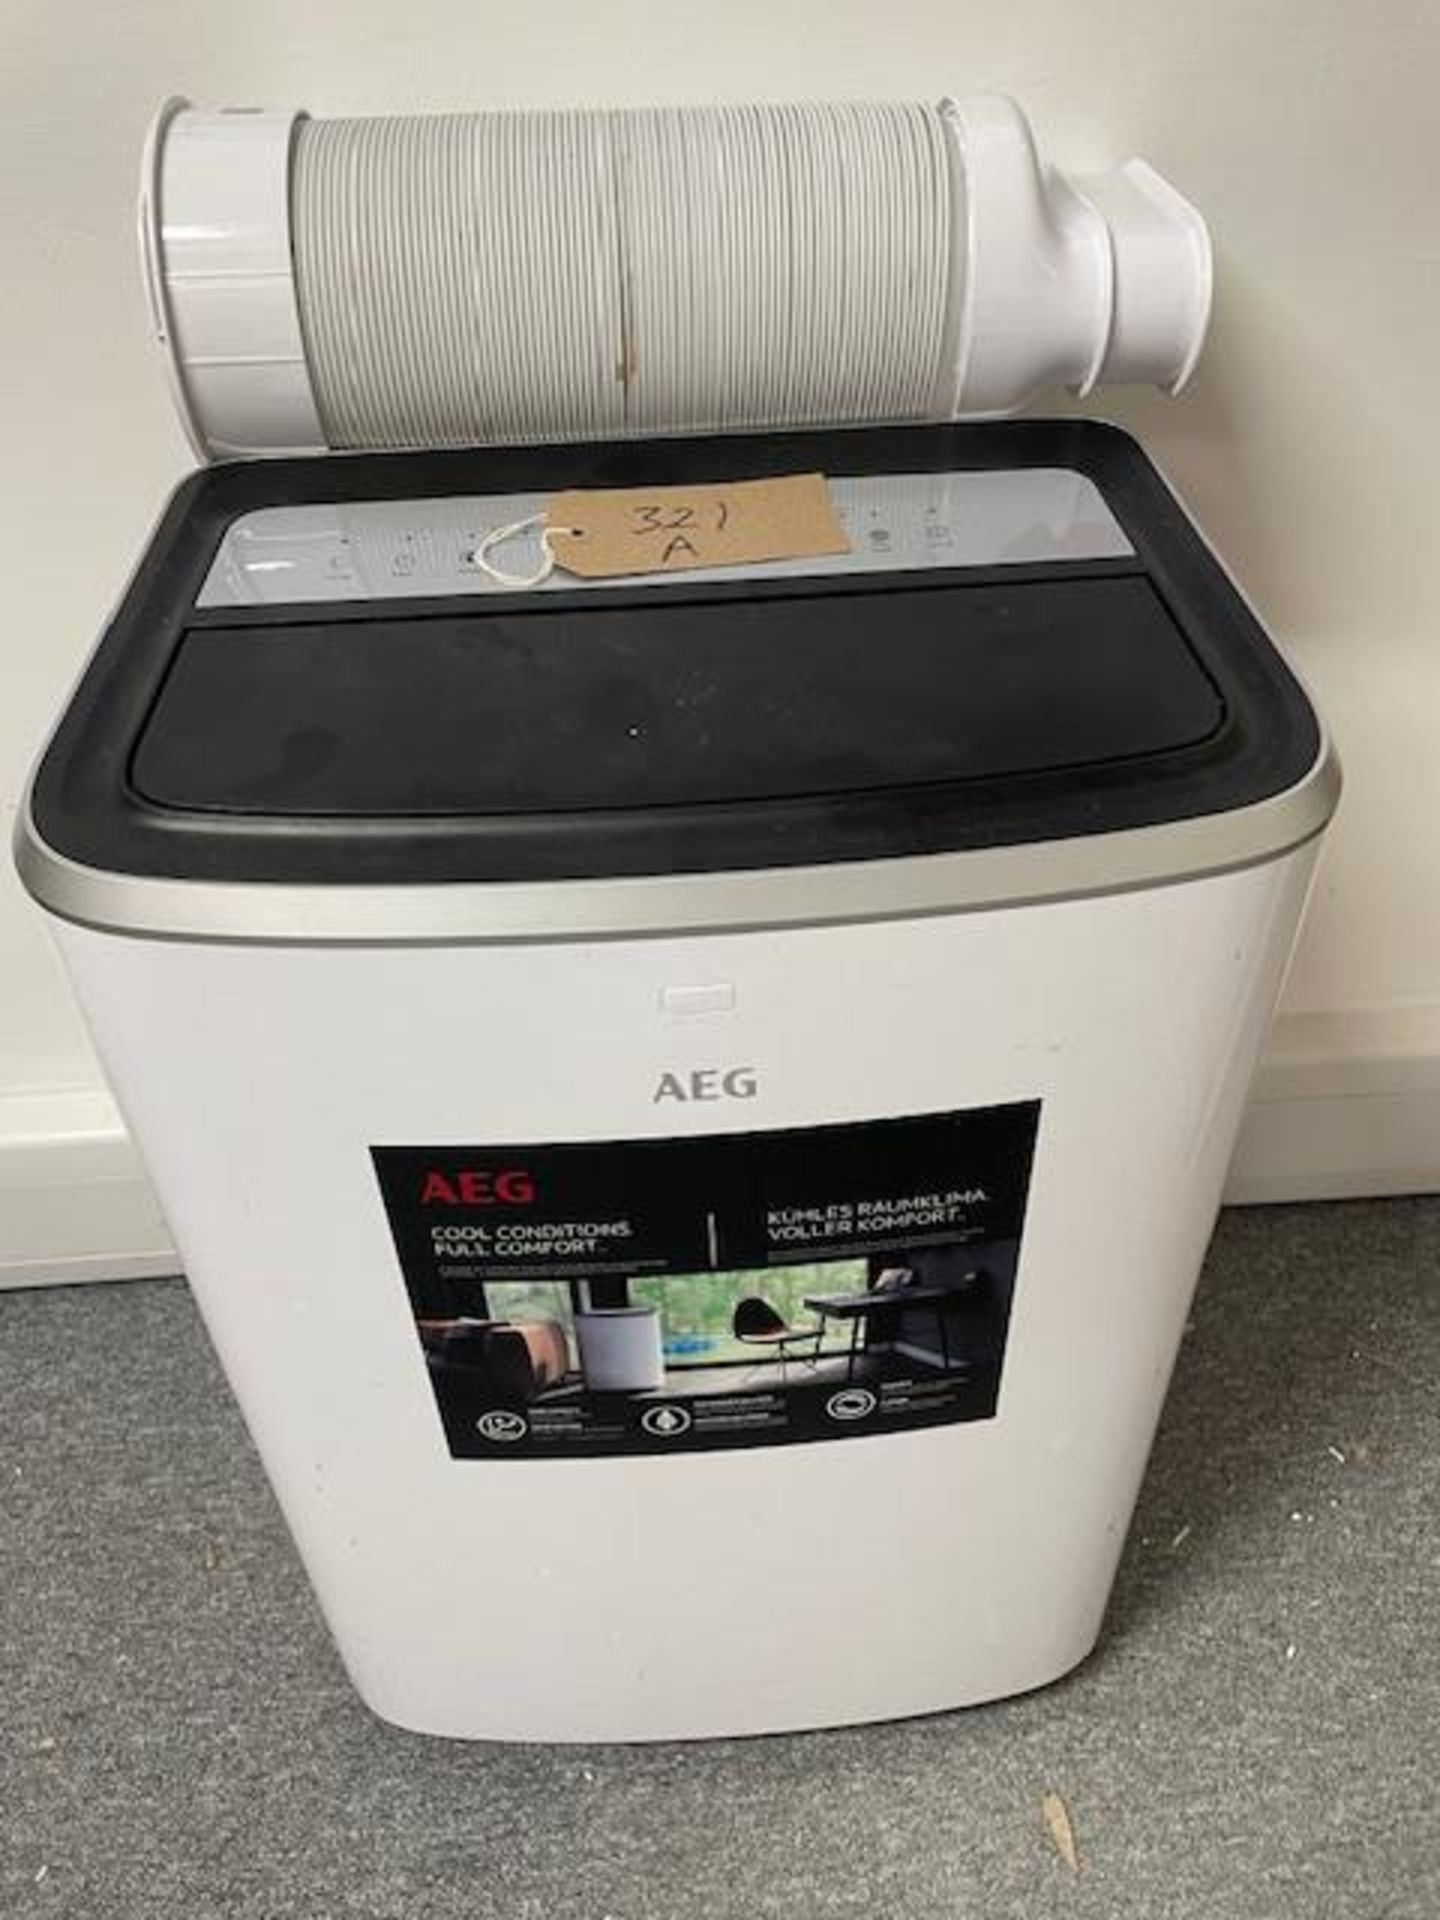 AEG Mobile Air Conditioner (Location: Newport Pagnell. Please Refer to General Notes)